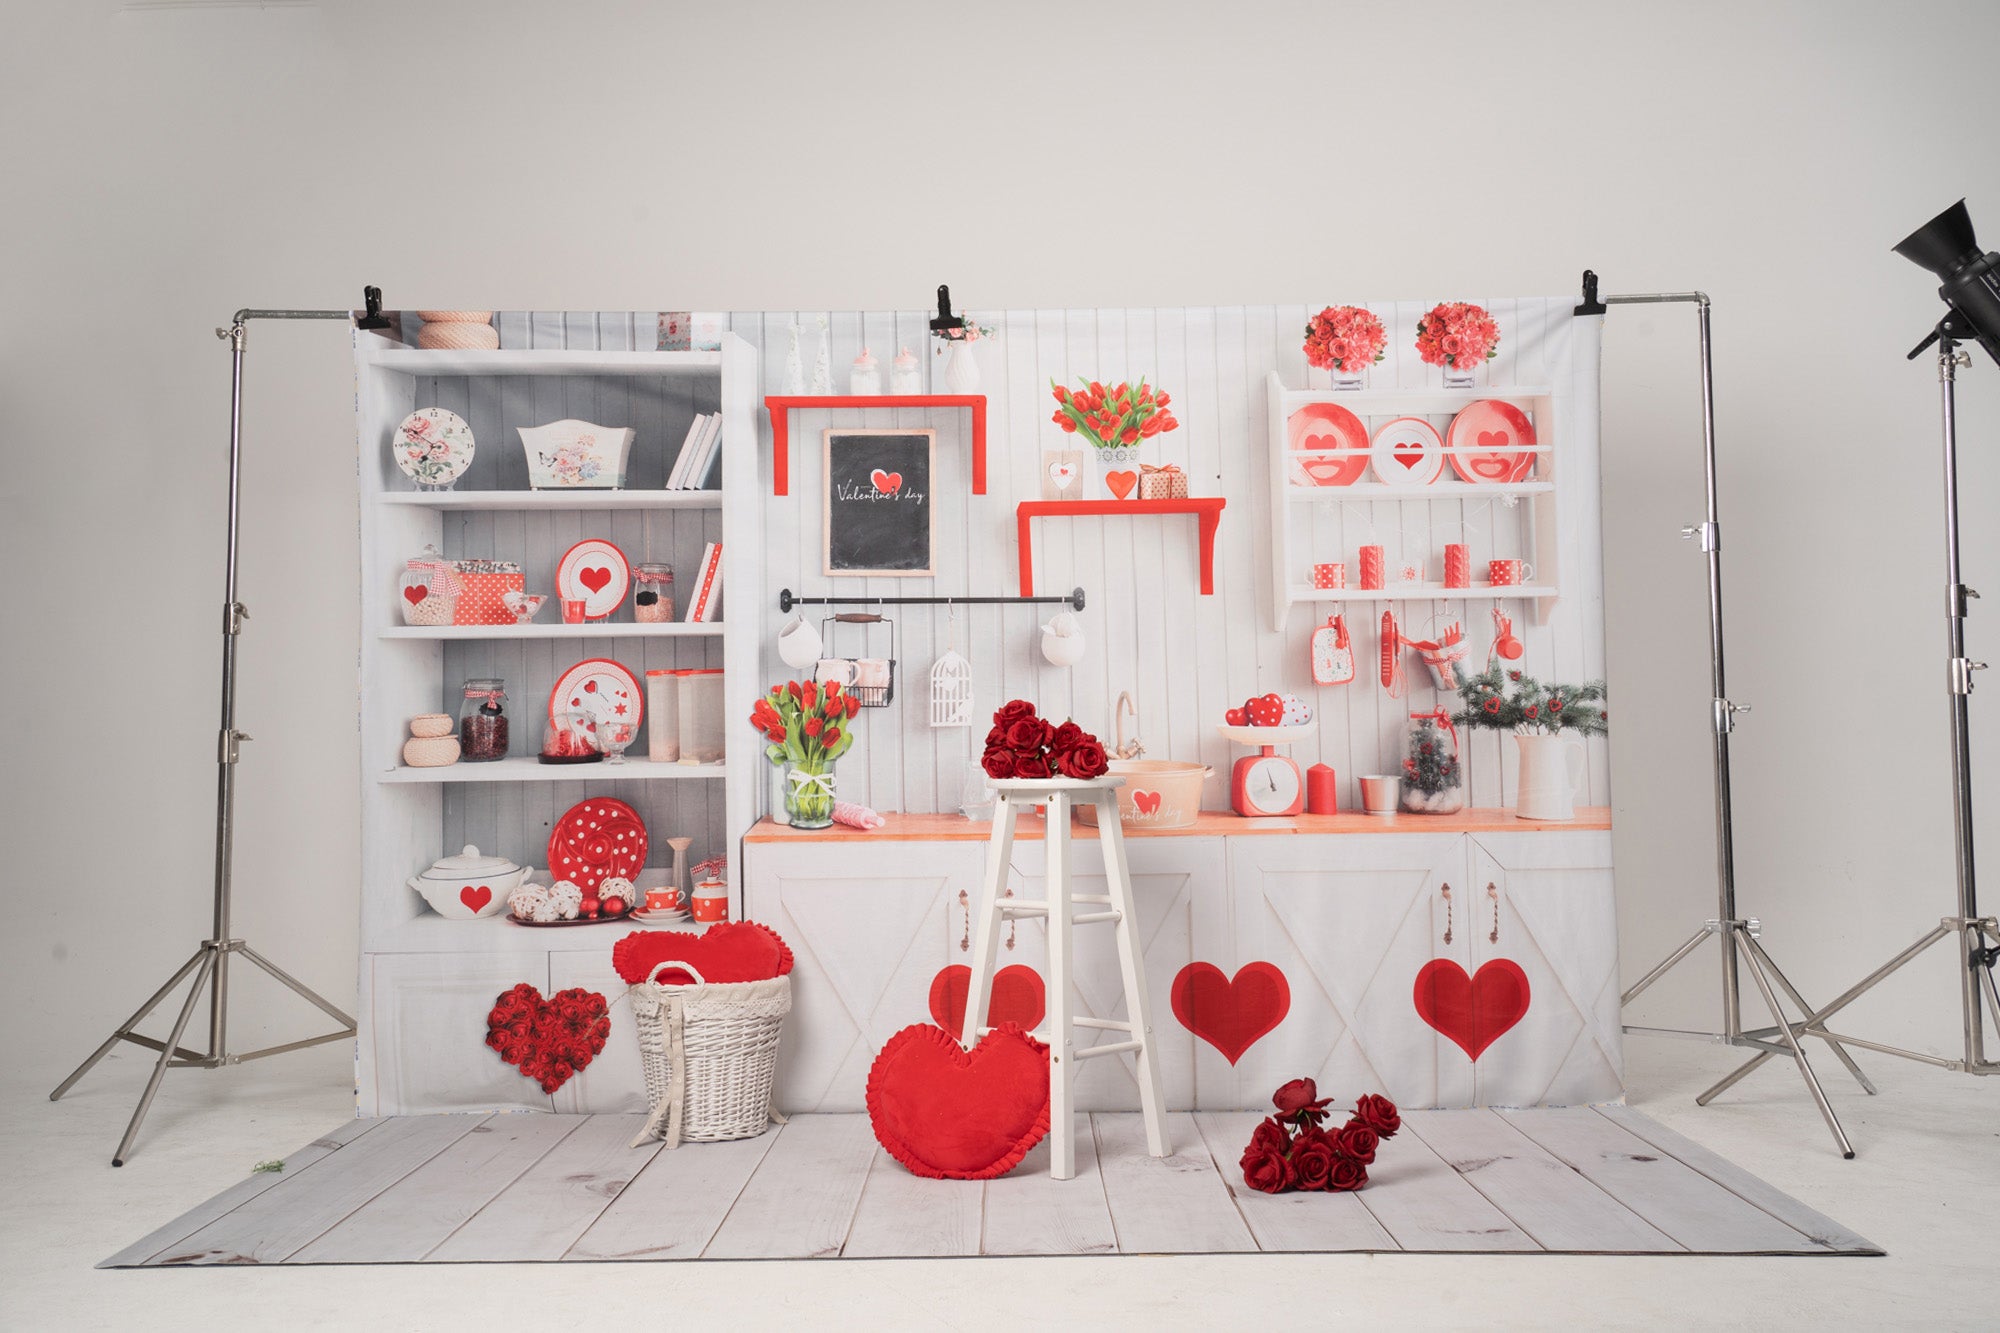 Kate Valentine‘s Day Love Bake Kitchen Backdrop for Photography